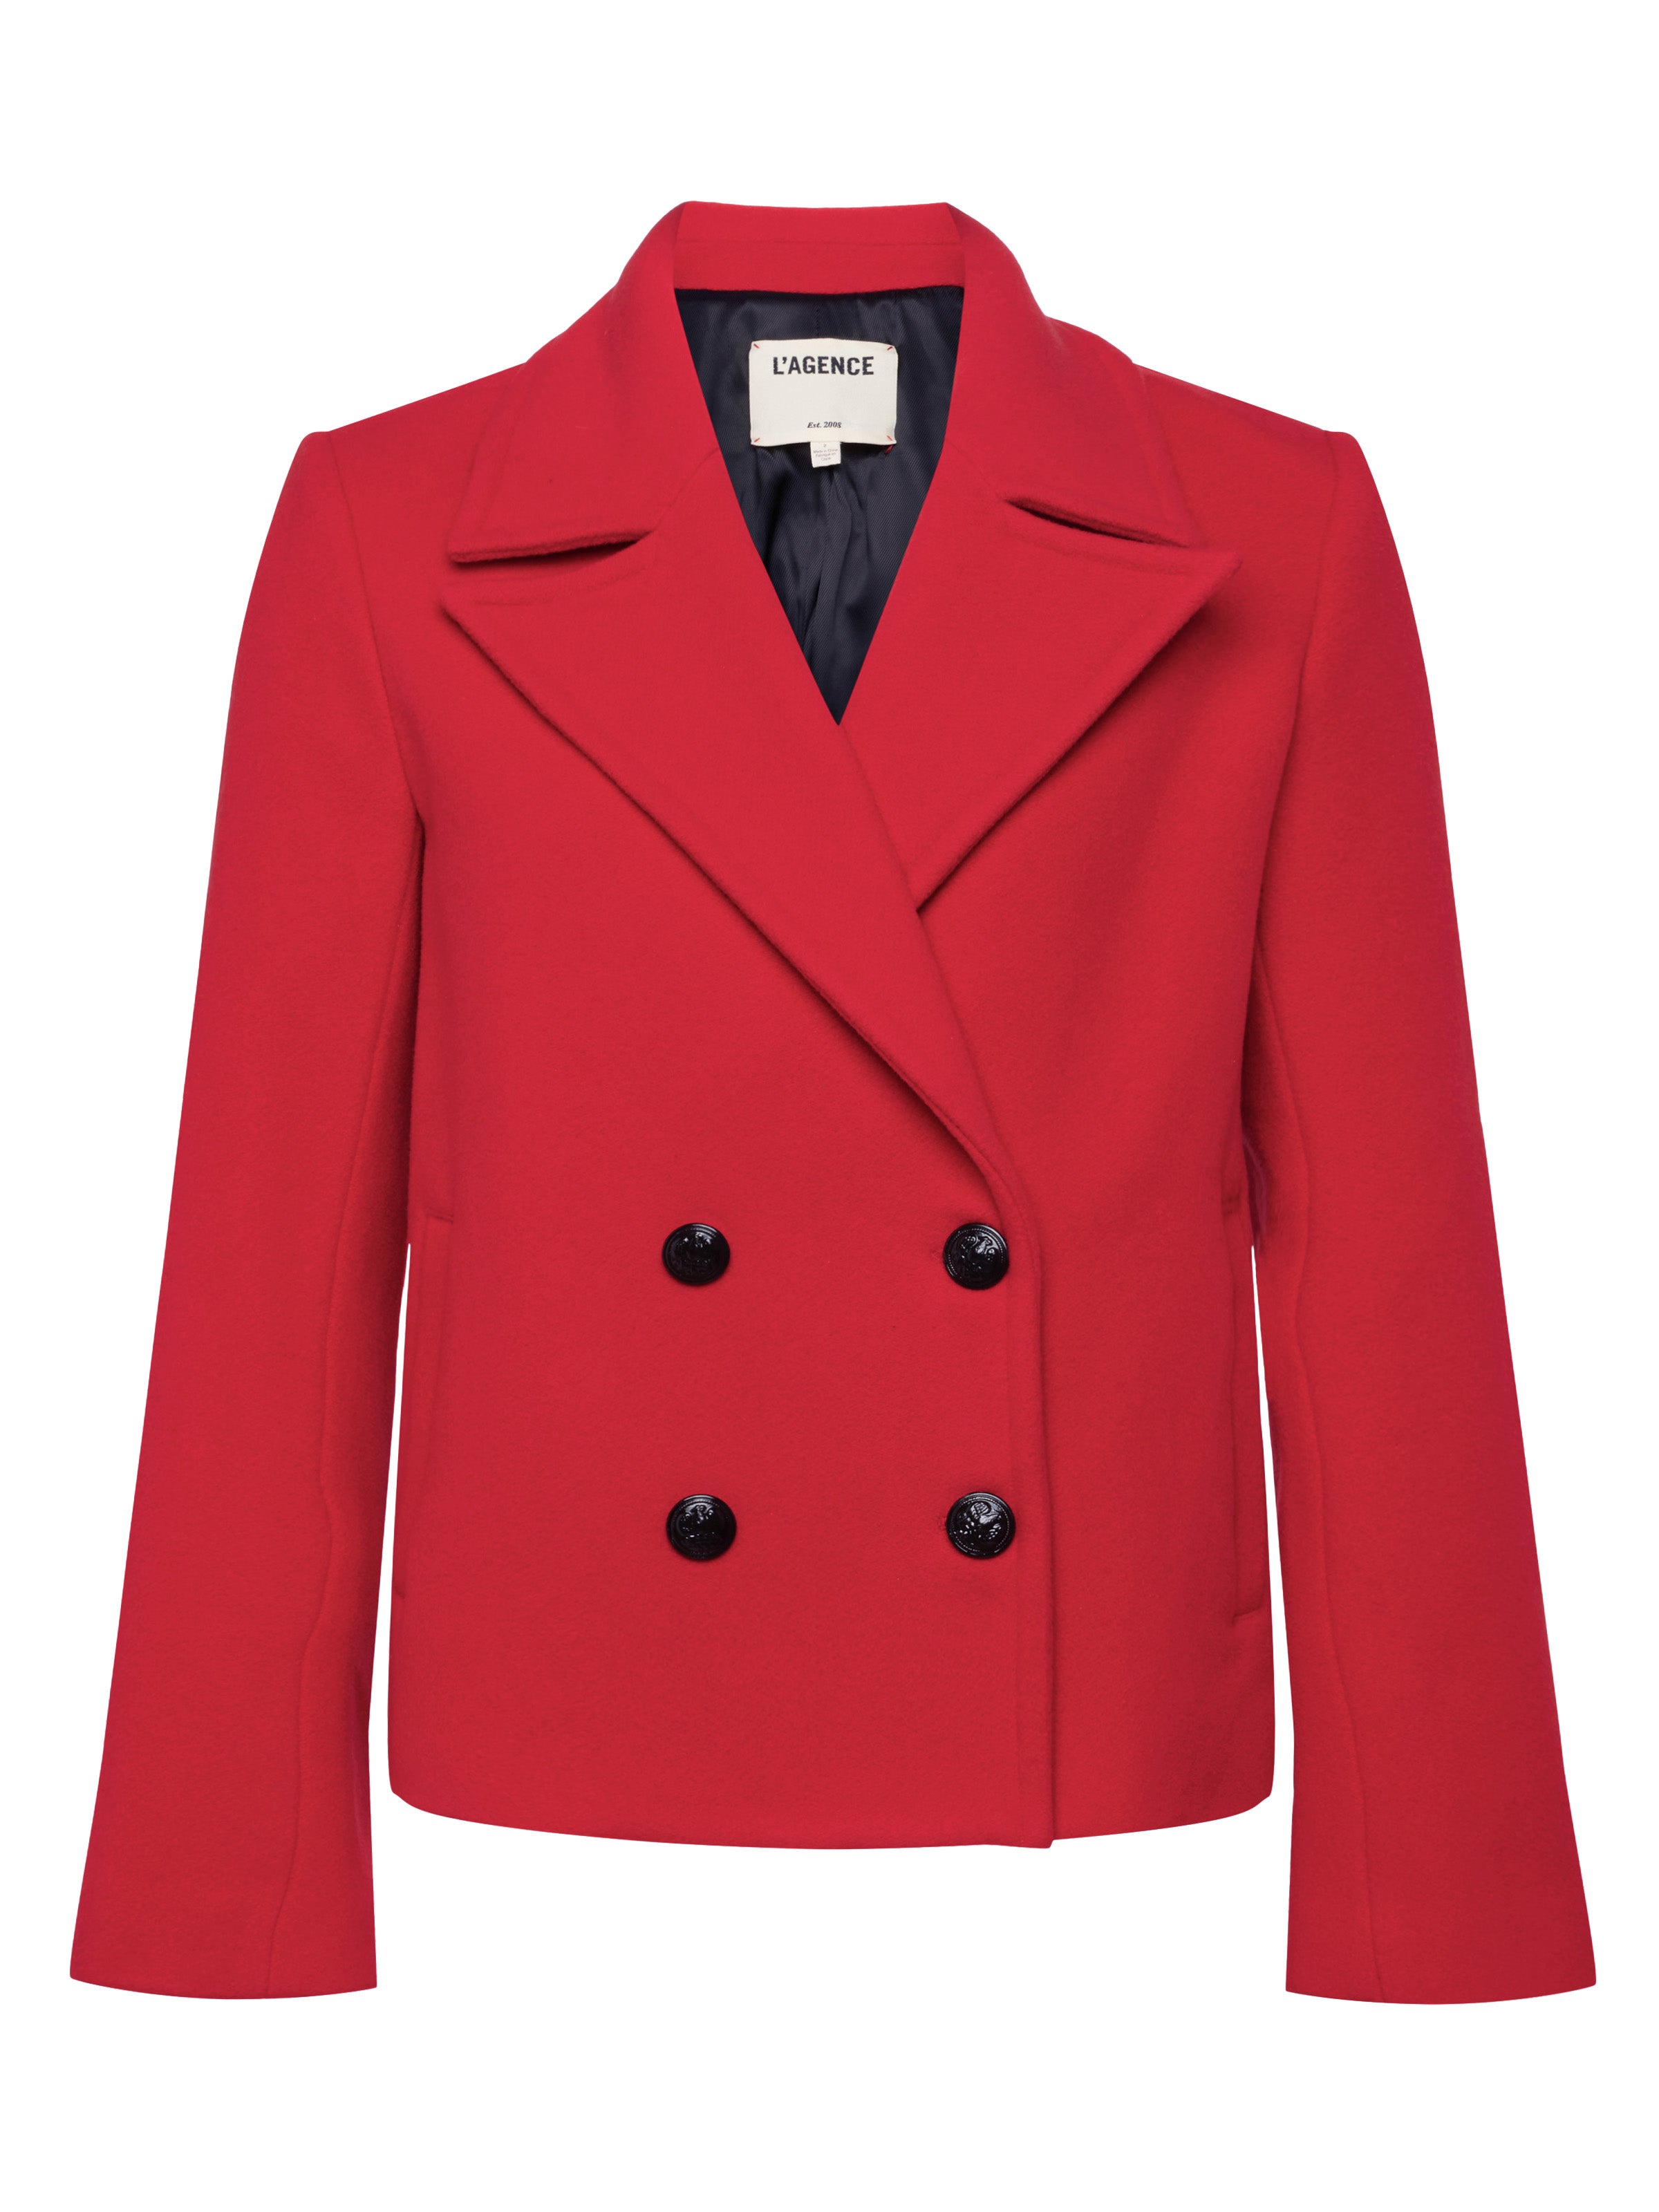 L'AGENCE Athens Cropped Peacoat in Lava Red